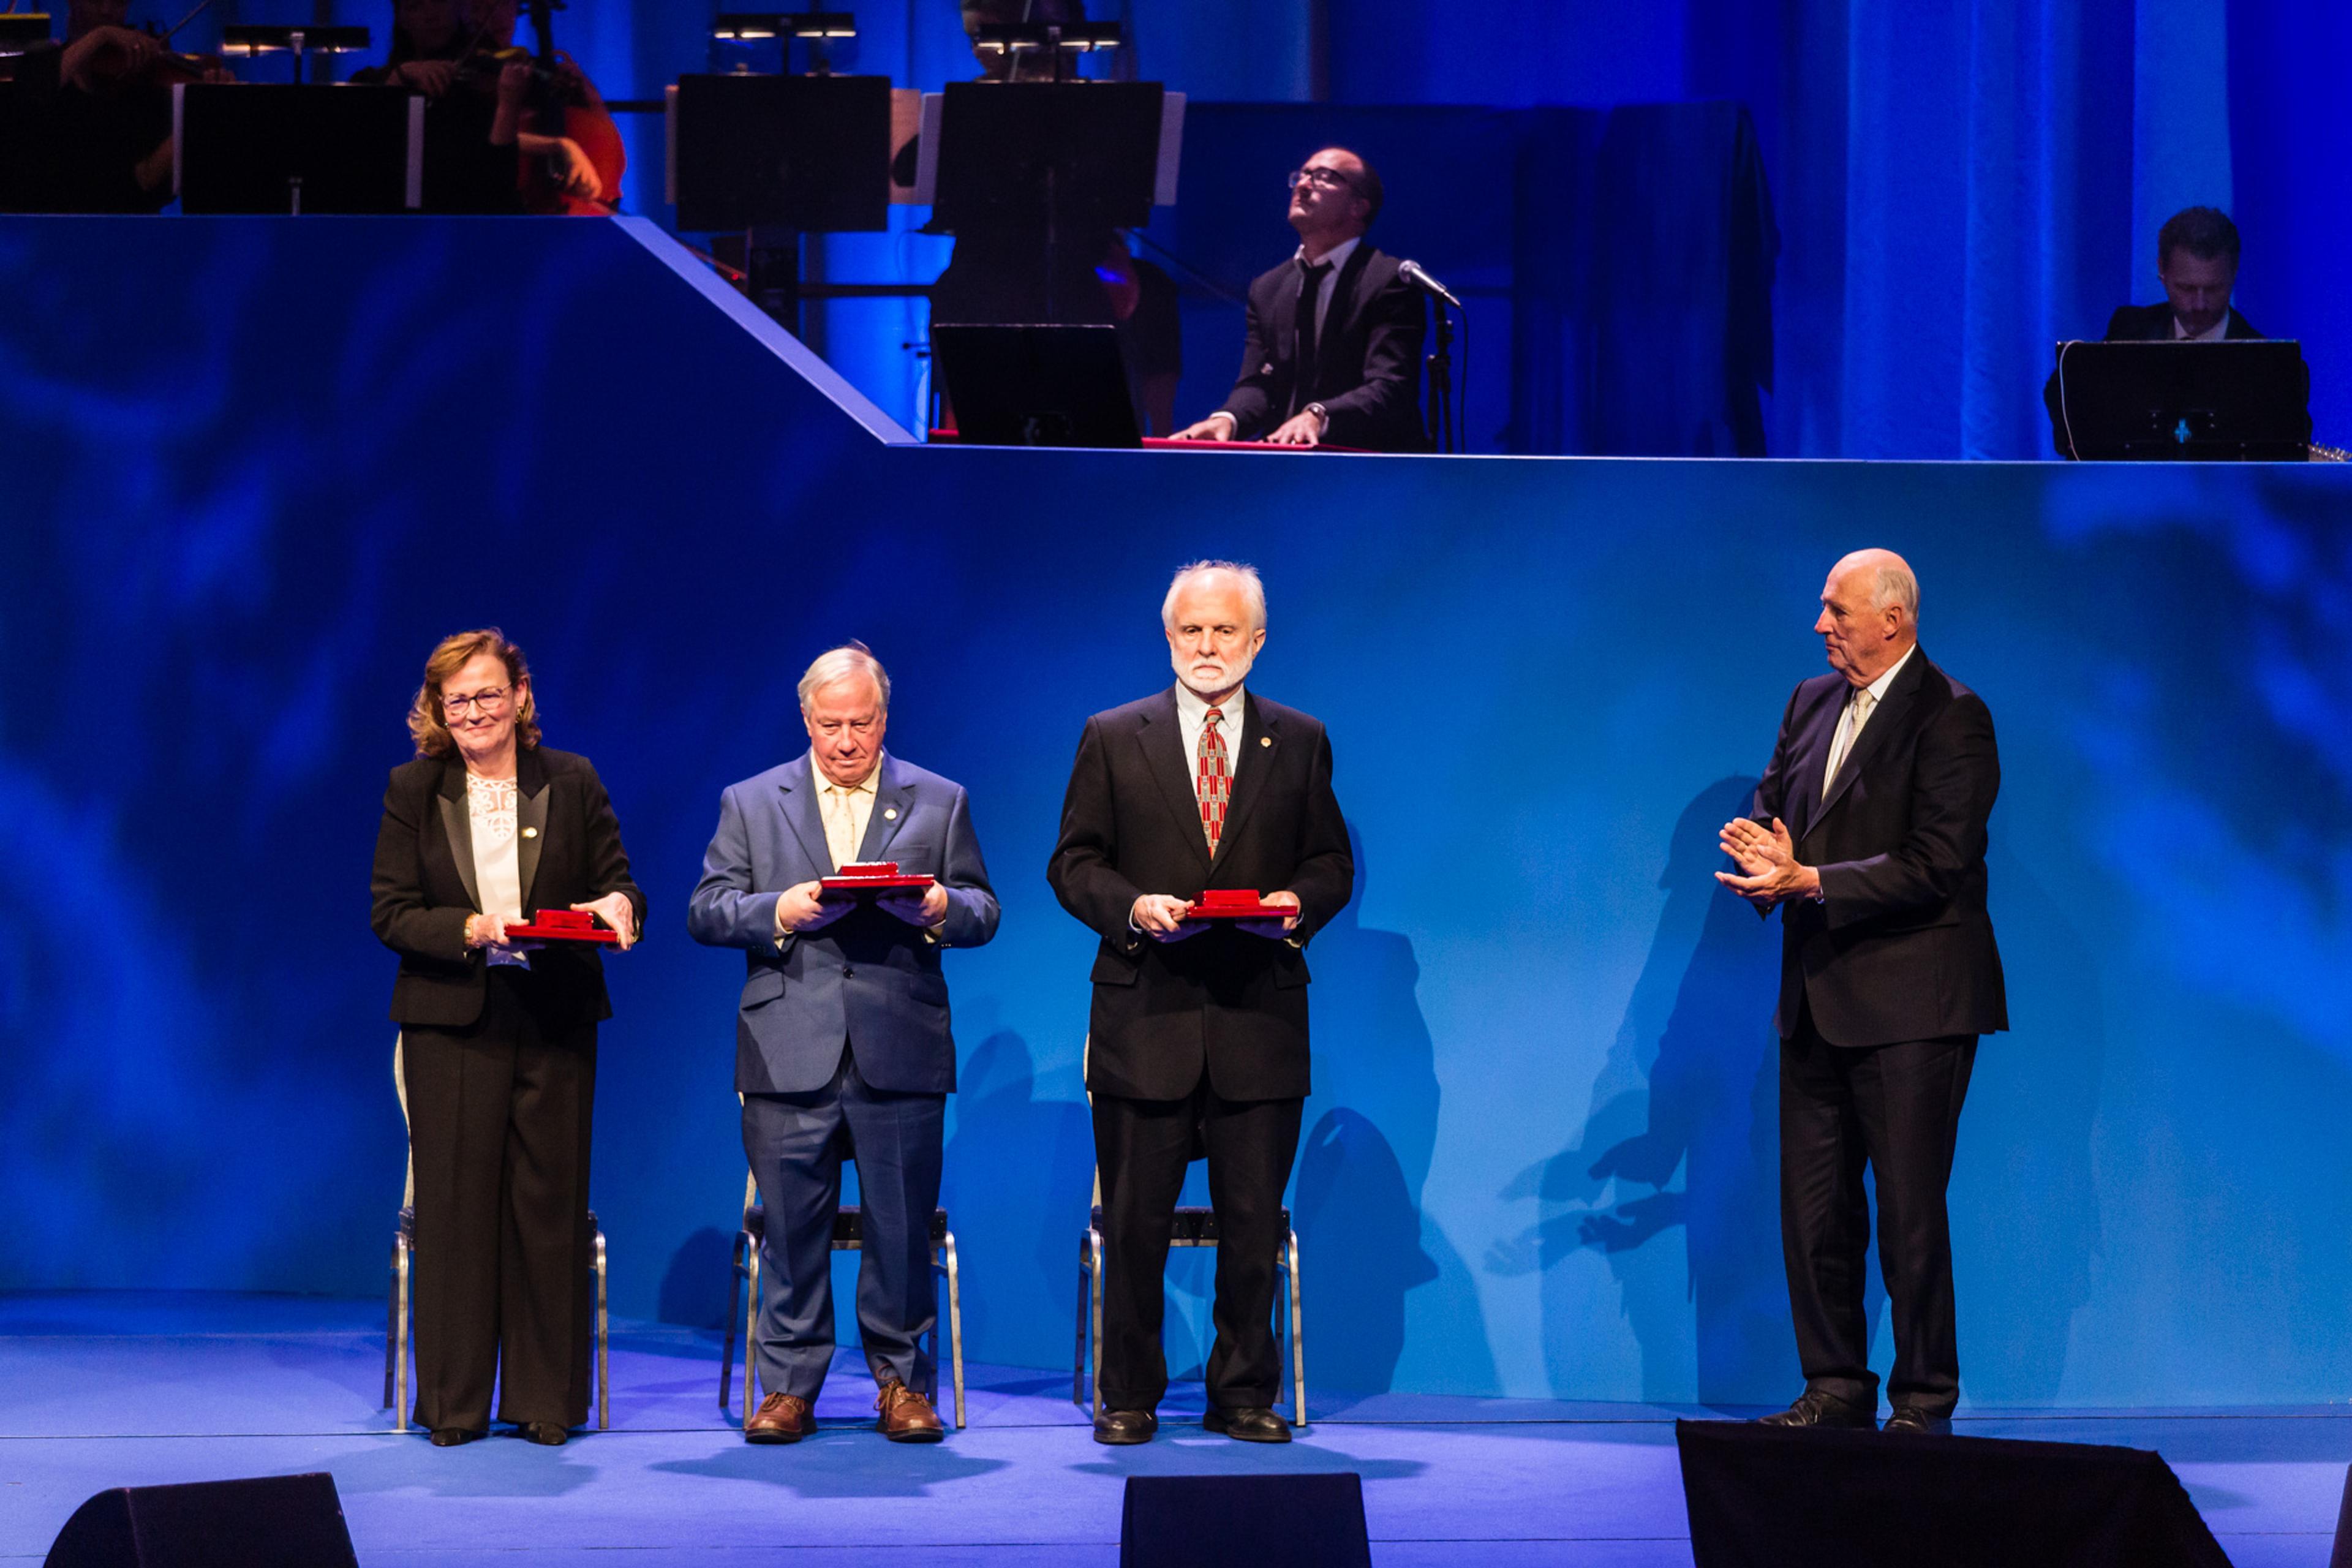 The 2018 Kavli Prize neuroscience laureates on stage in Oslo Concert Hall after having received the awards from His Royal Highness King Harald